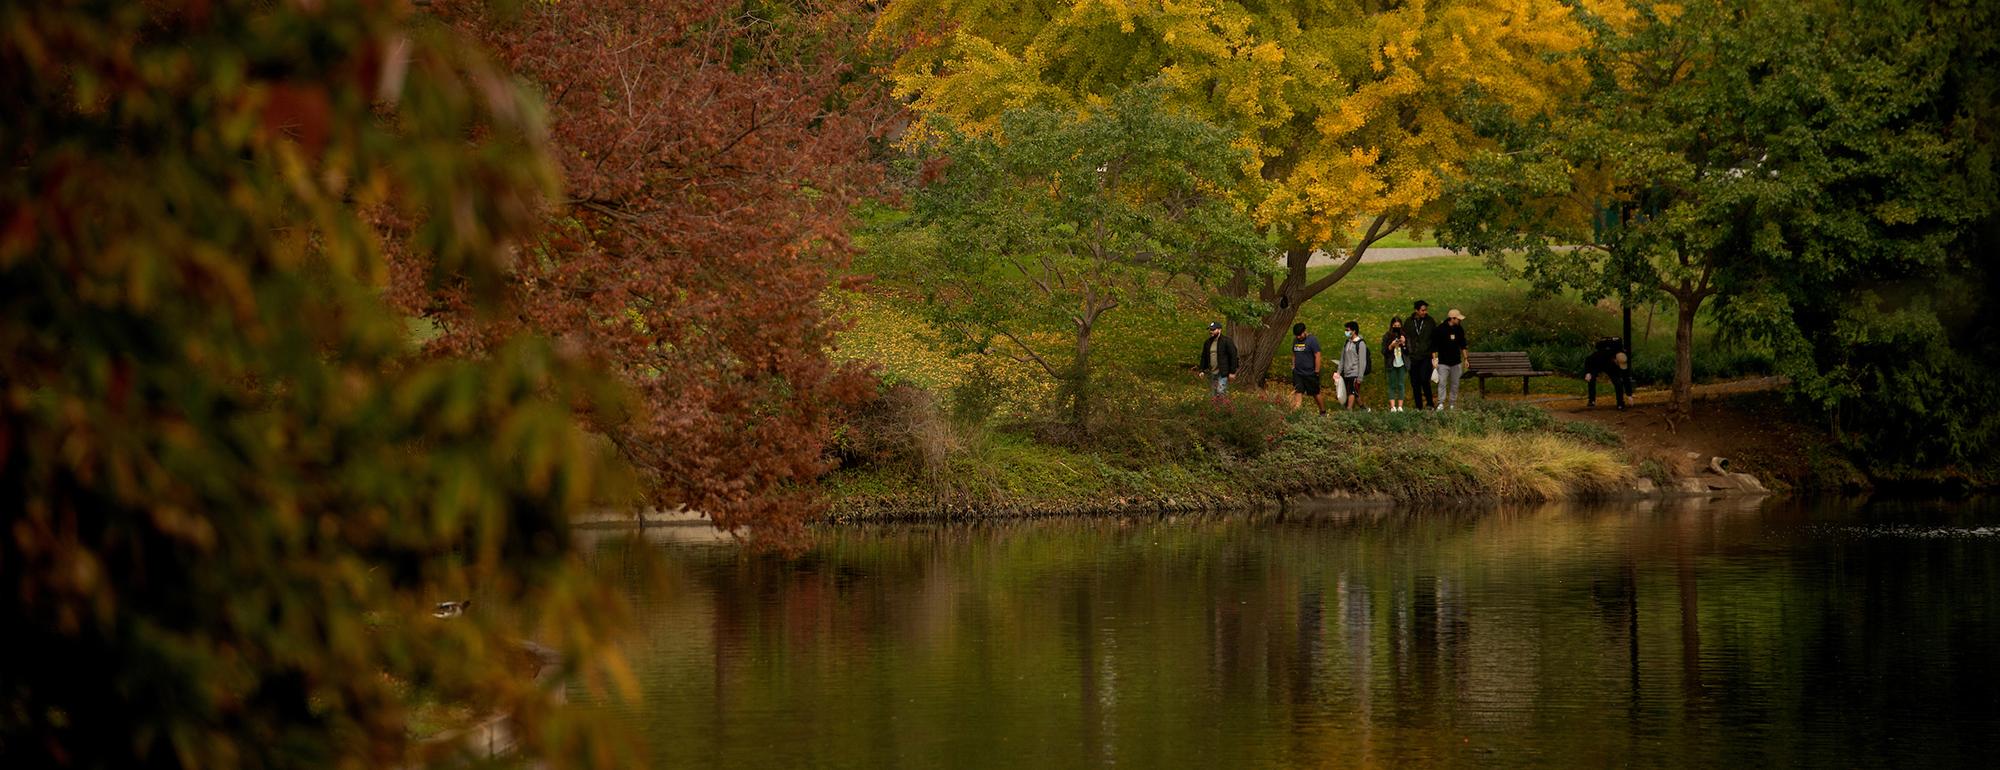 people among autumn trees and a pond